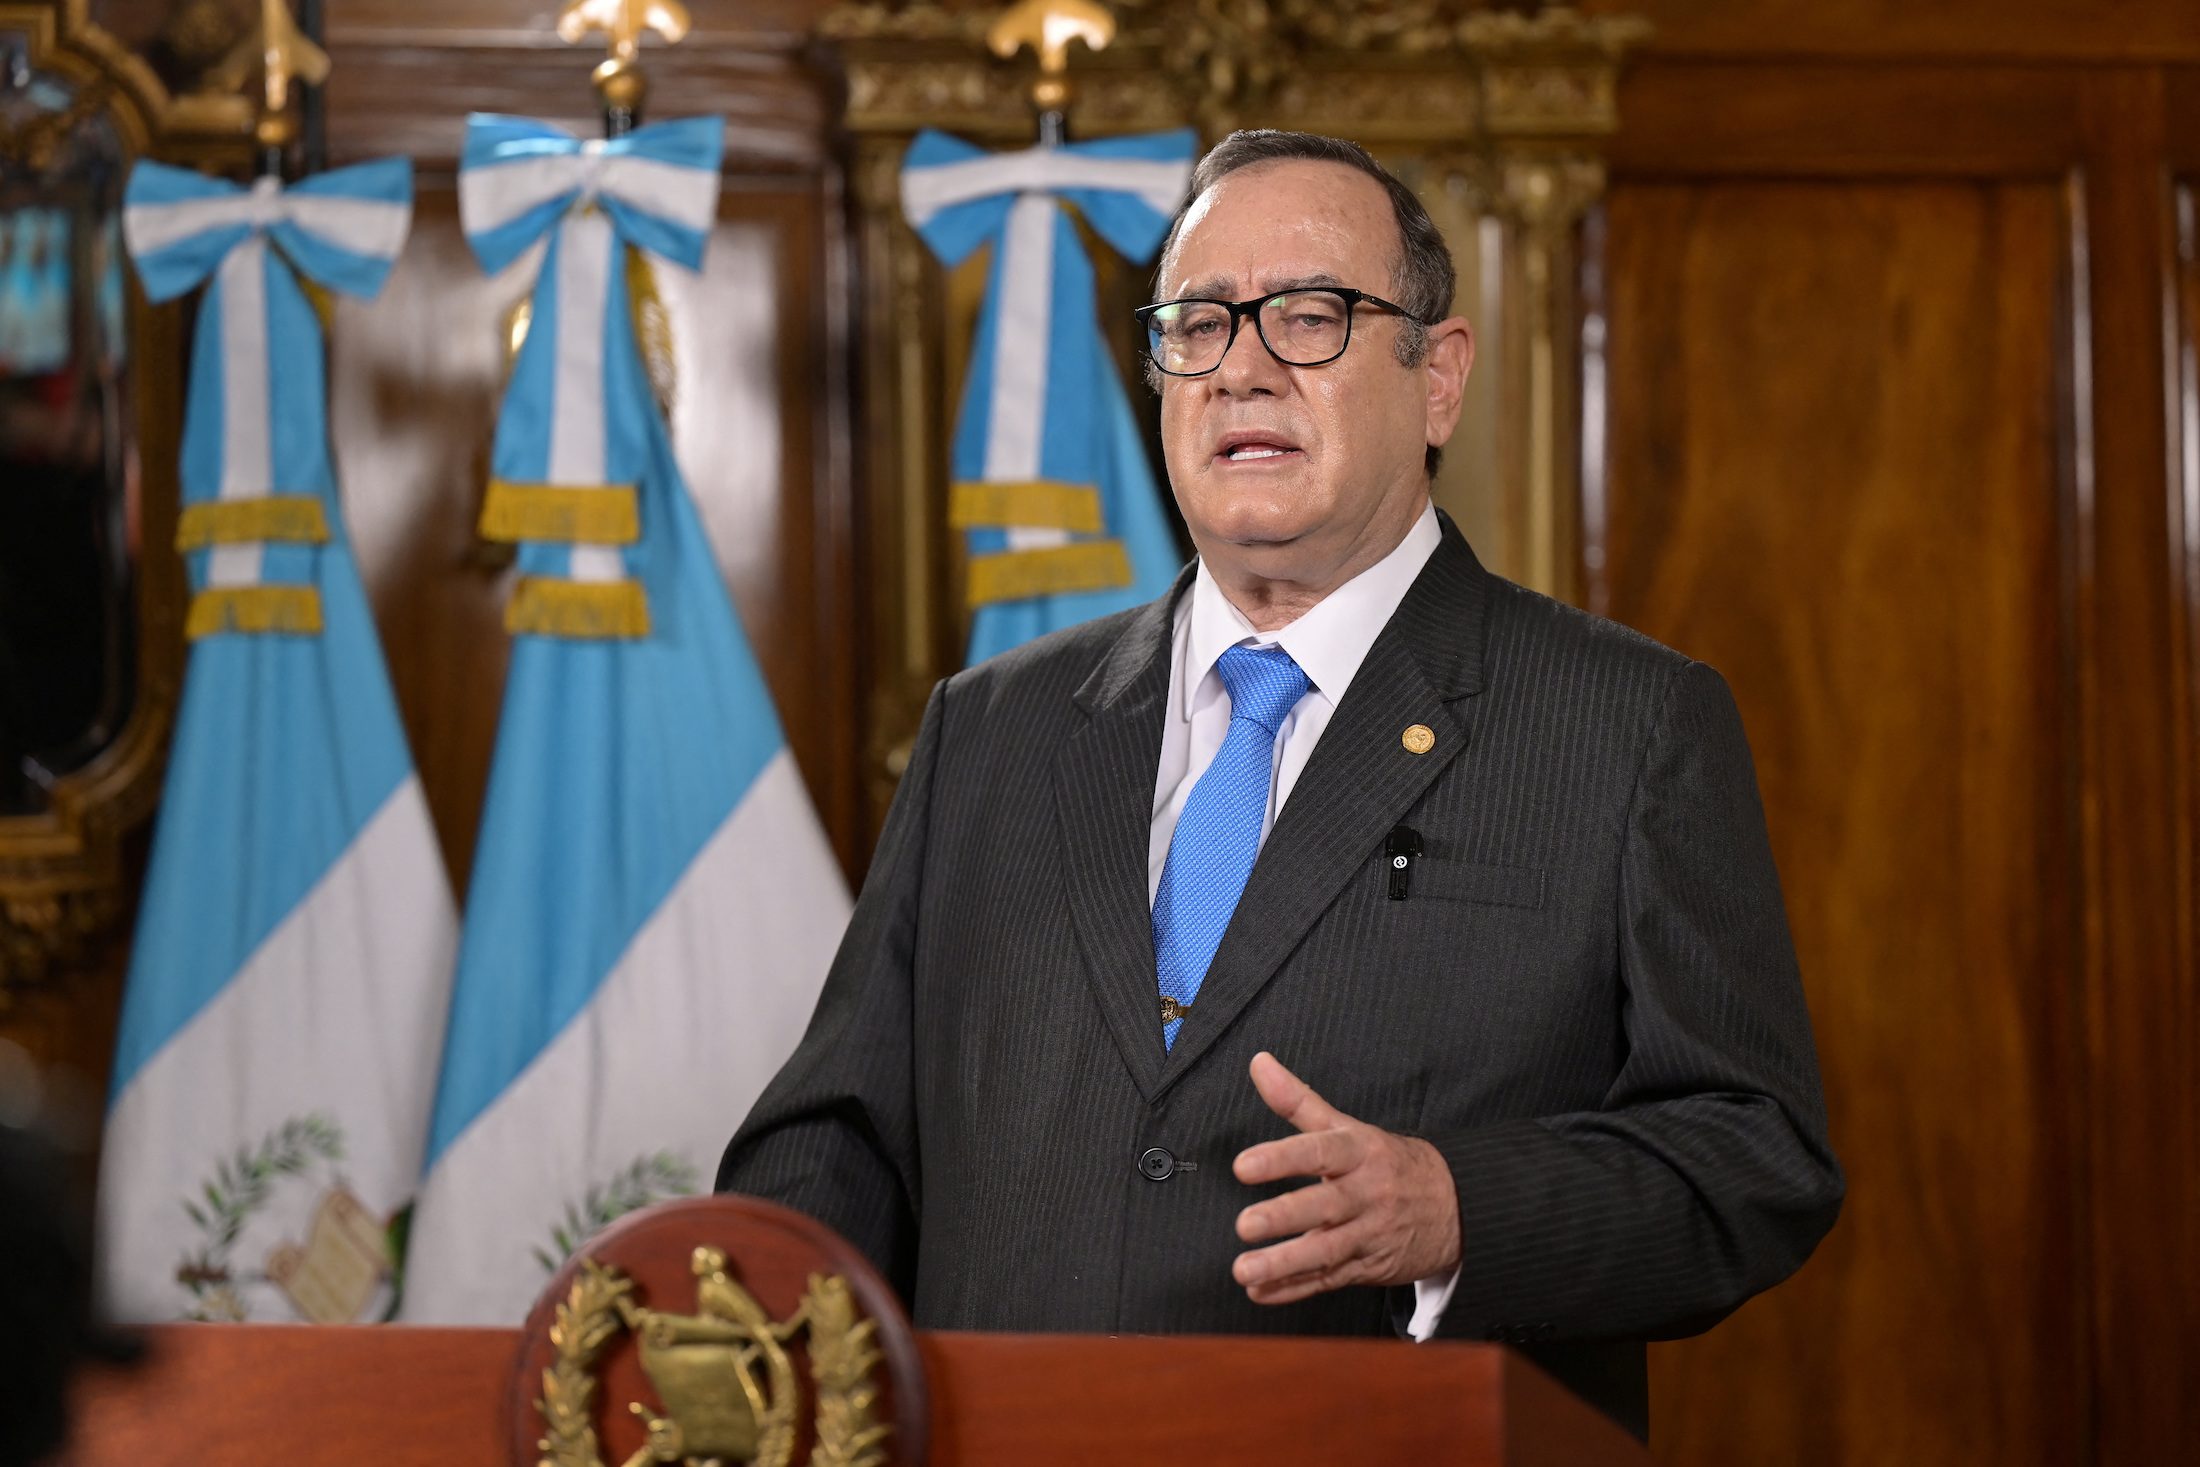 Guatemala president vows ‘orderly’ power transition following election